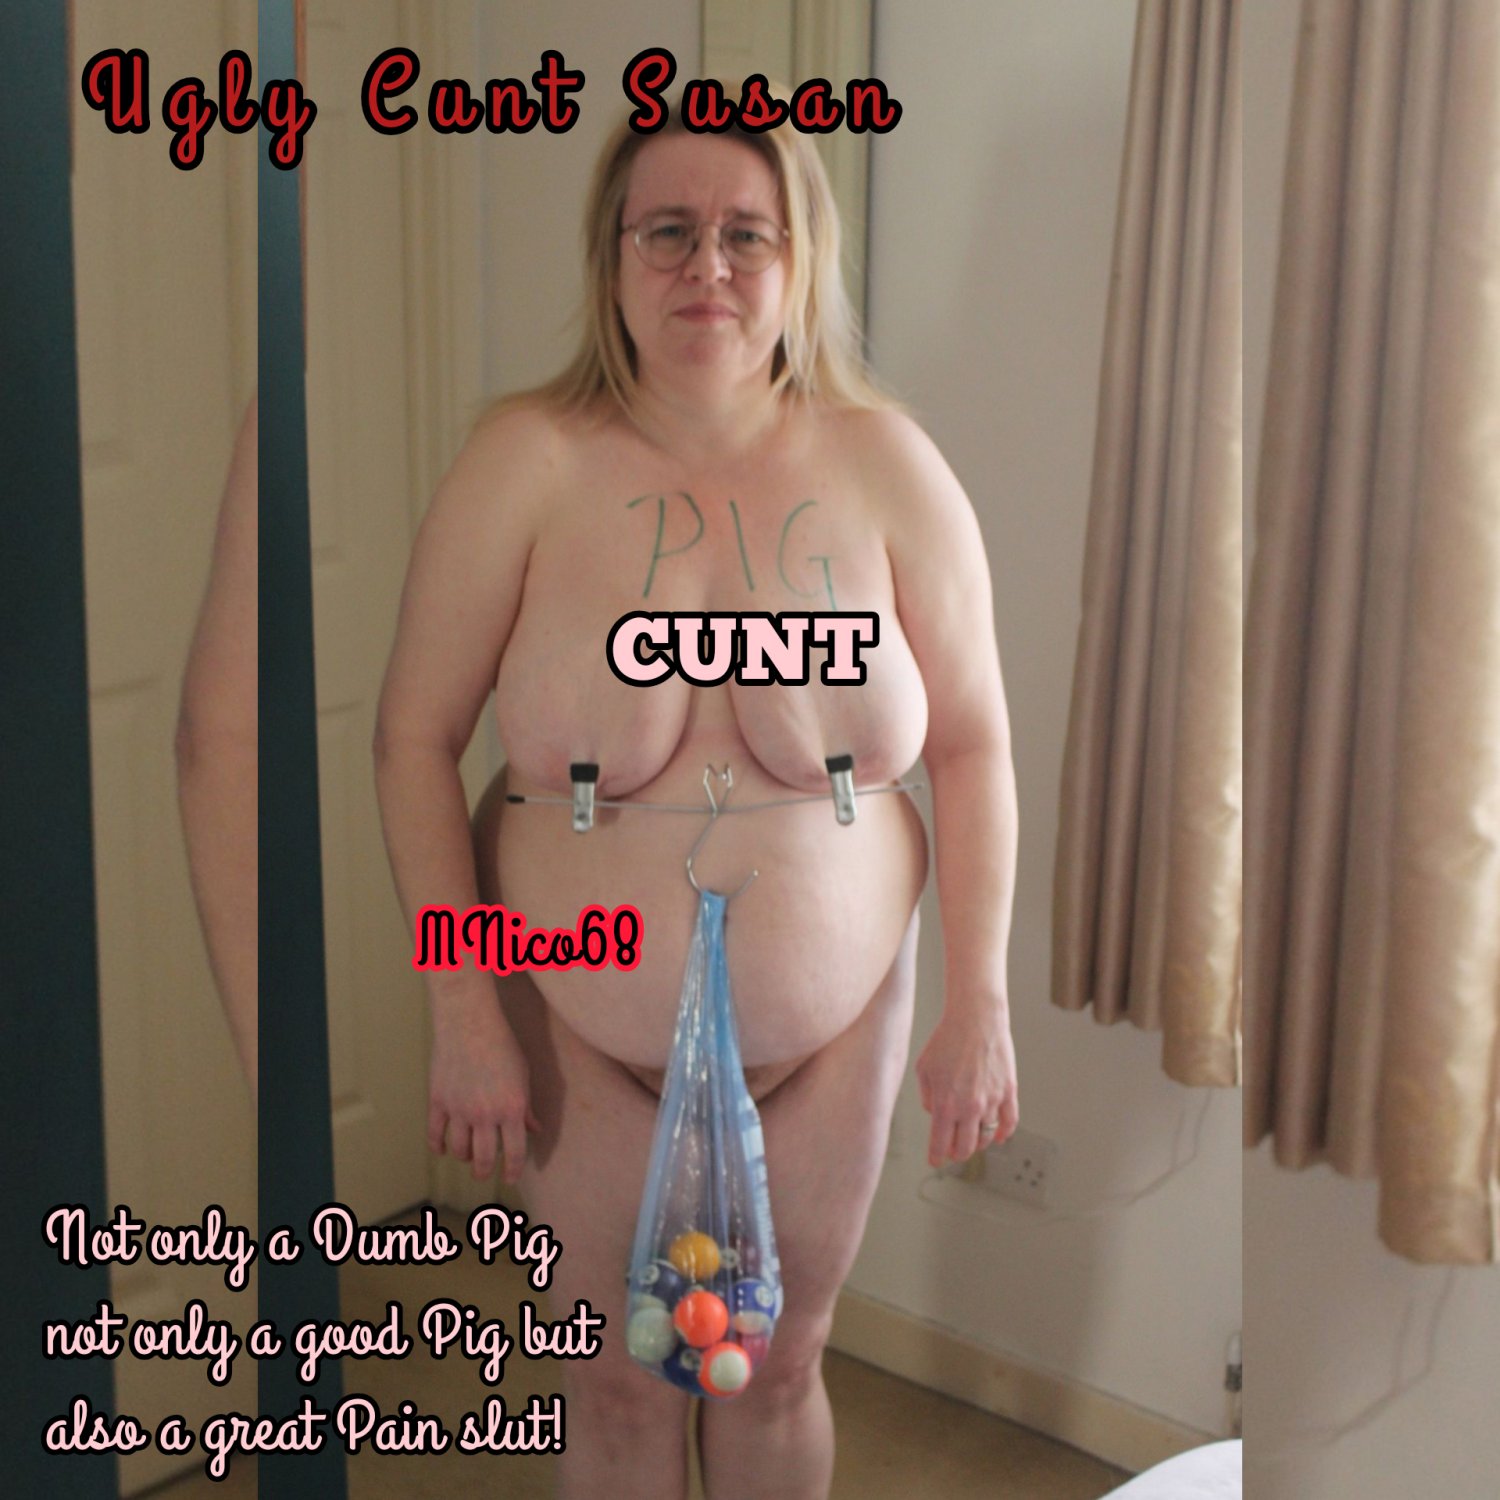 Ugly Cunt Susan, UK Fat Pig to use/abuse/humiliation,comment on...